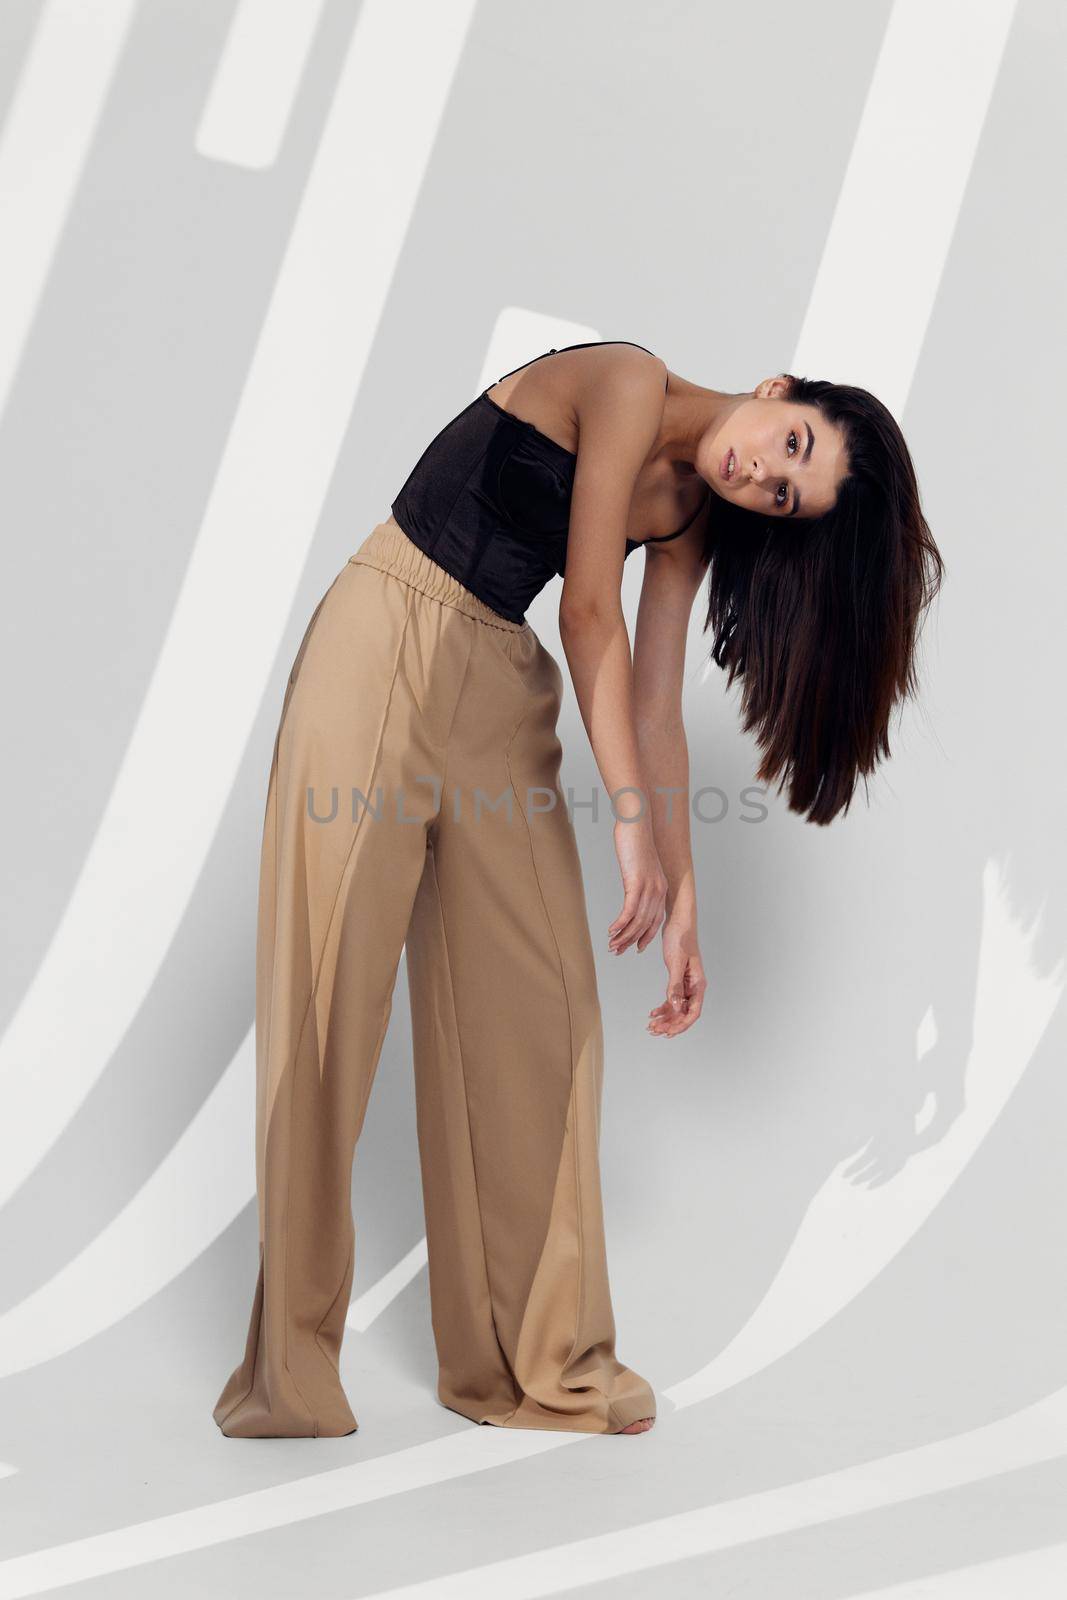 Emotional brunette in fashionable clothes bent over wavy hair by SHOTPRIME